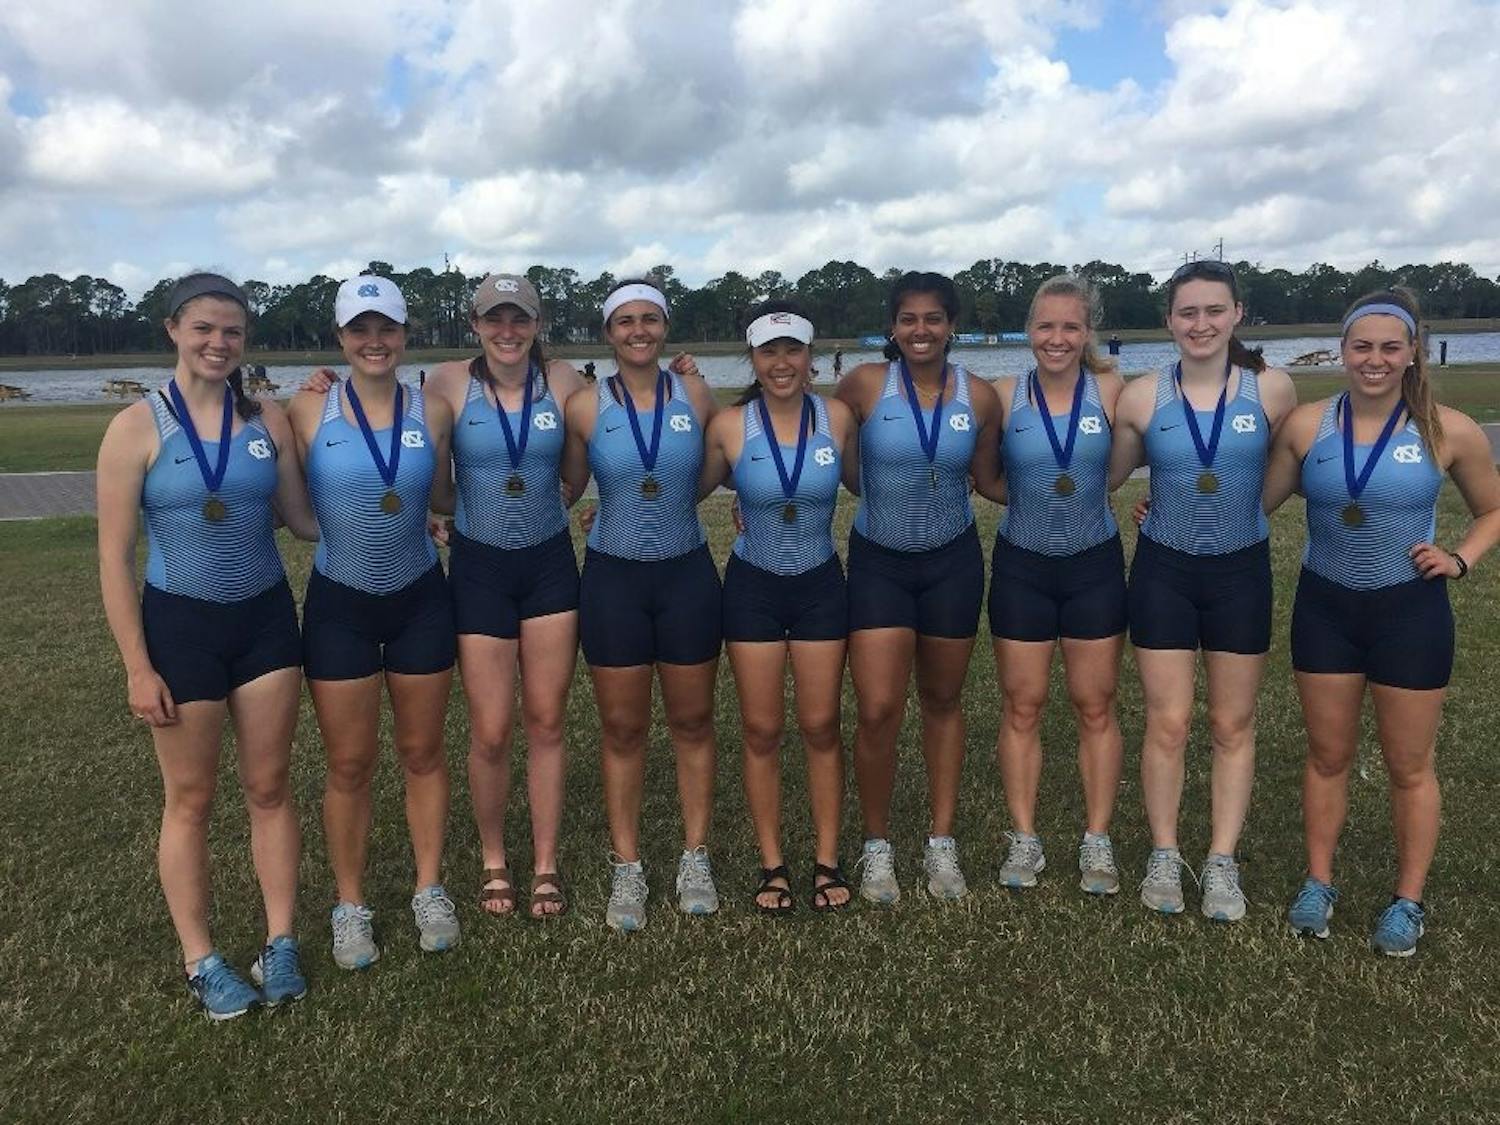 The UNC 3V8 rowing team earned gold at the Sunshine State Invitational in Sarasota, Fla., on April 8. Photo courtesy of UNC Athletic Department.